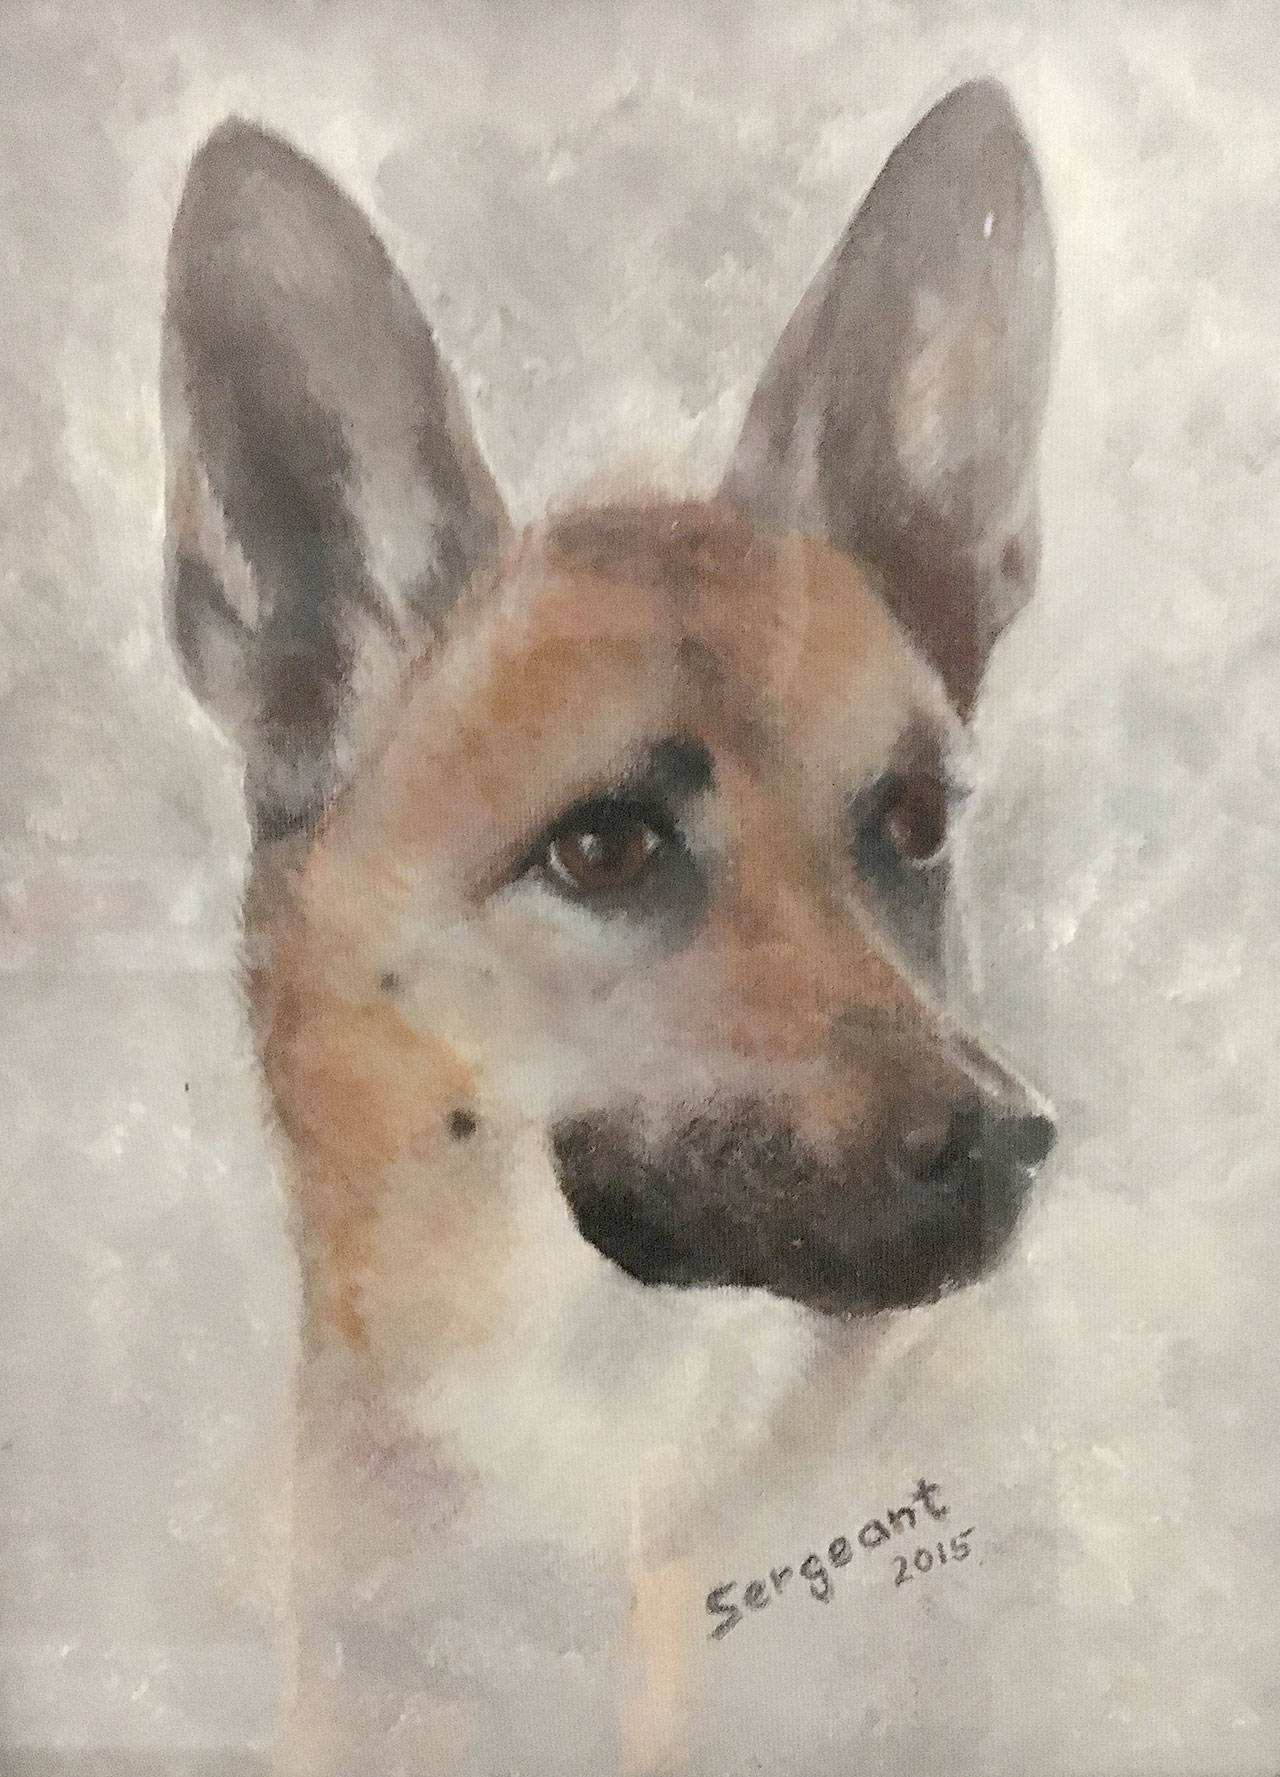 Bruce Corbridge’s painting of his dog, Sergeant, is among the pieces displayed in the Port Ludlow Art League exhibit.